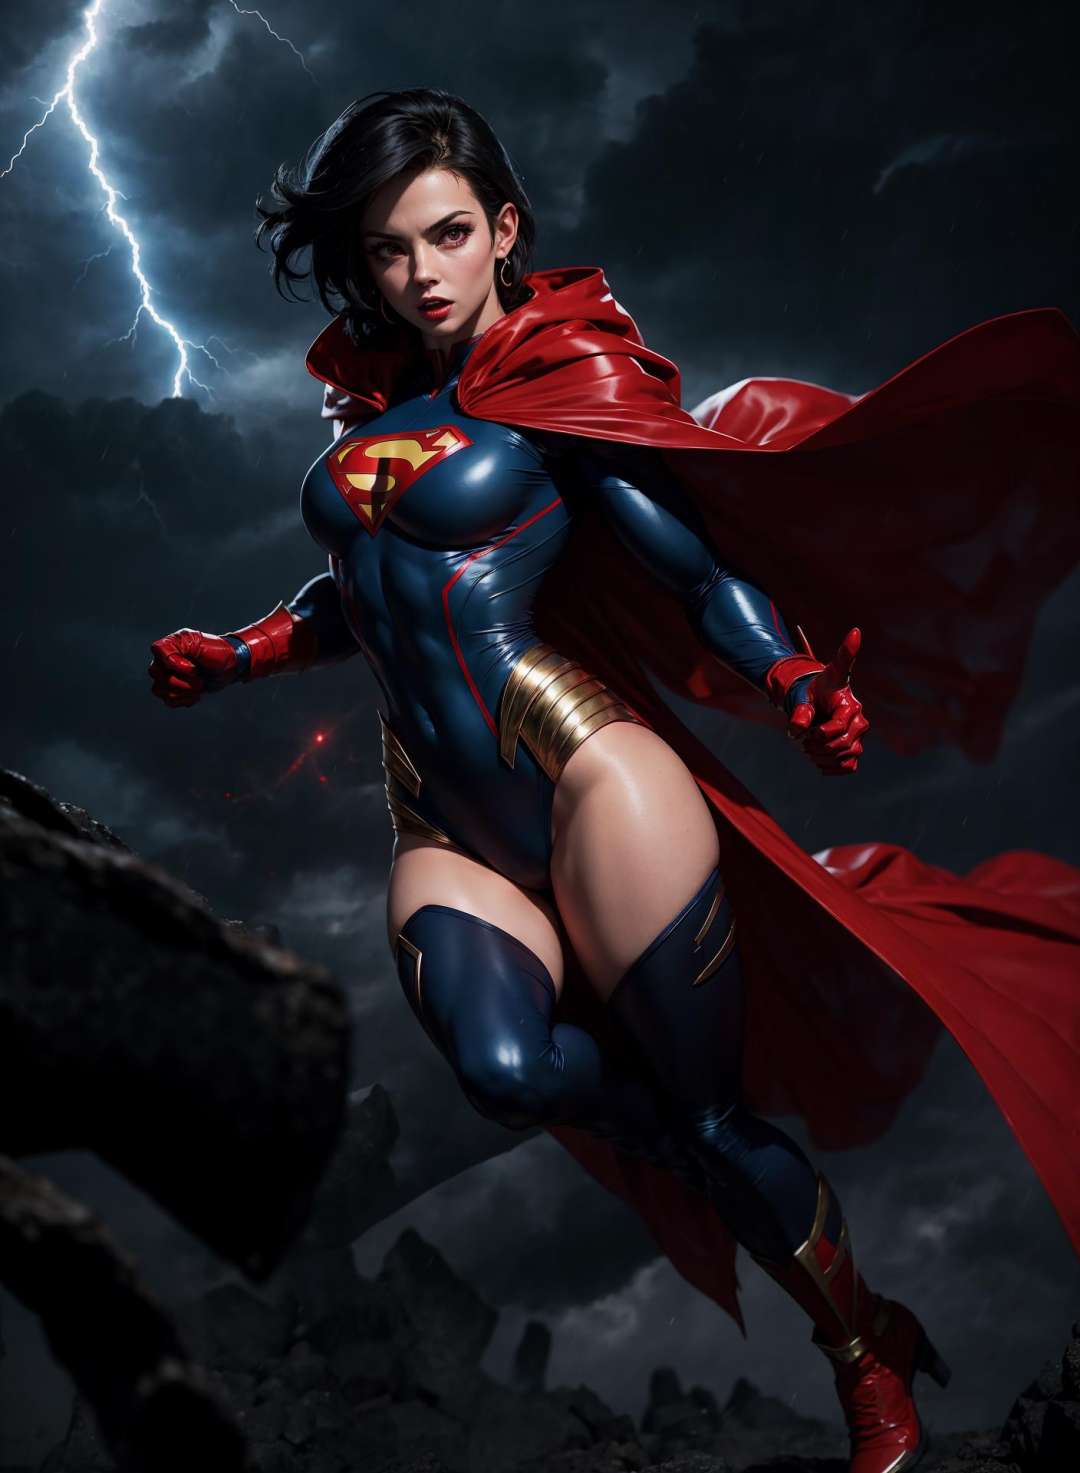 muscular lady in superman costume flying in sky, short black hair, red cape, glowing red eyes, arms up, storm, dark clouds, lightning, night, lightning, rain, particles